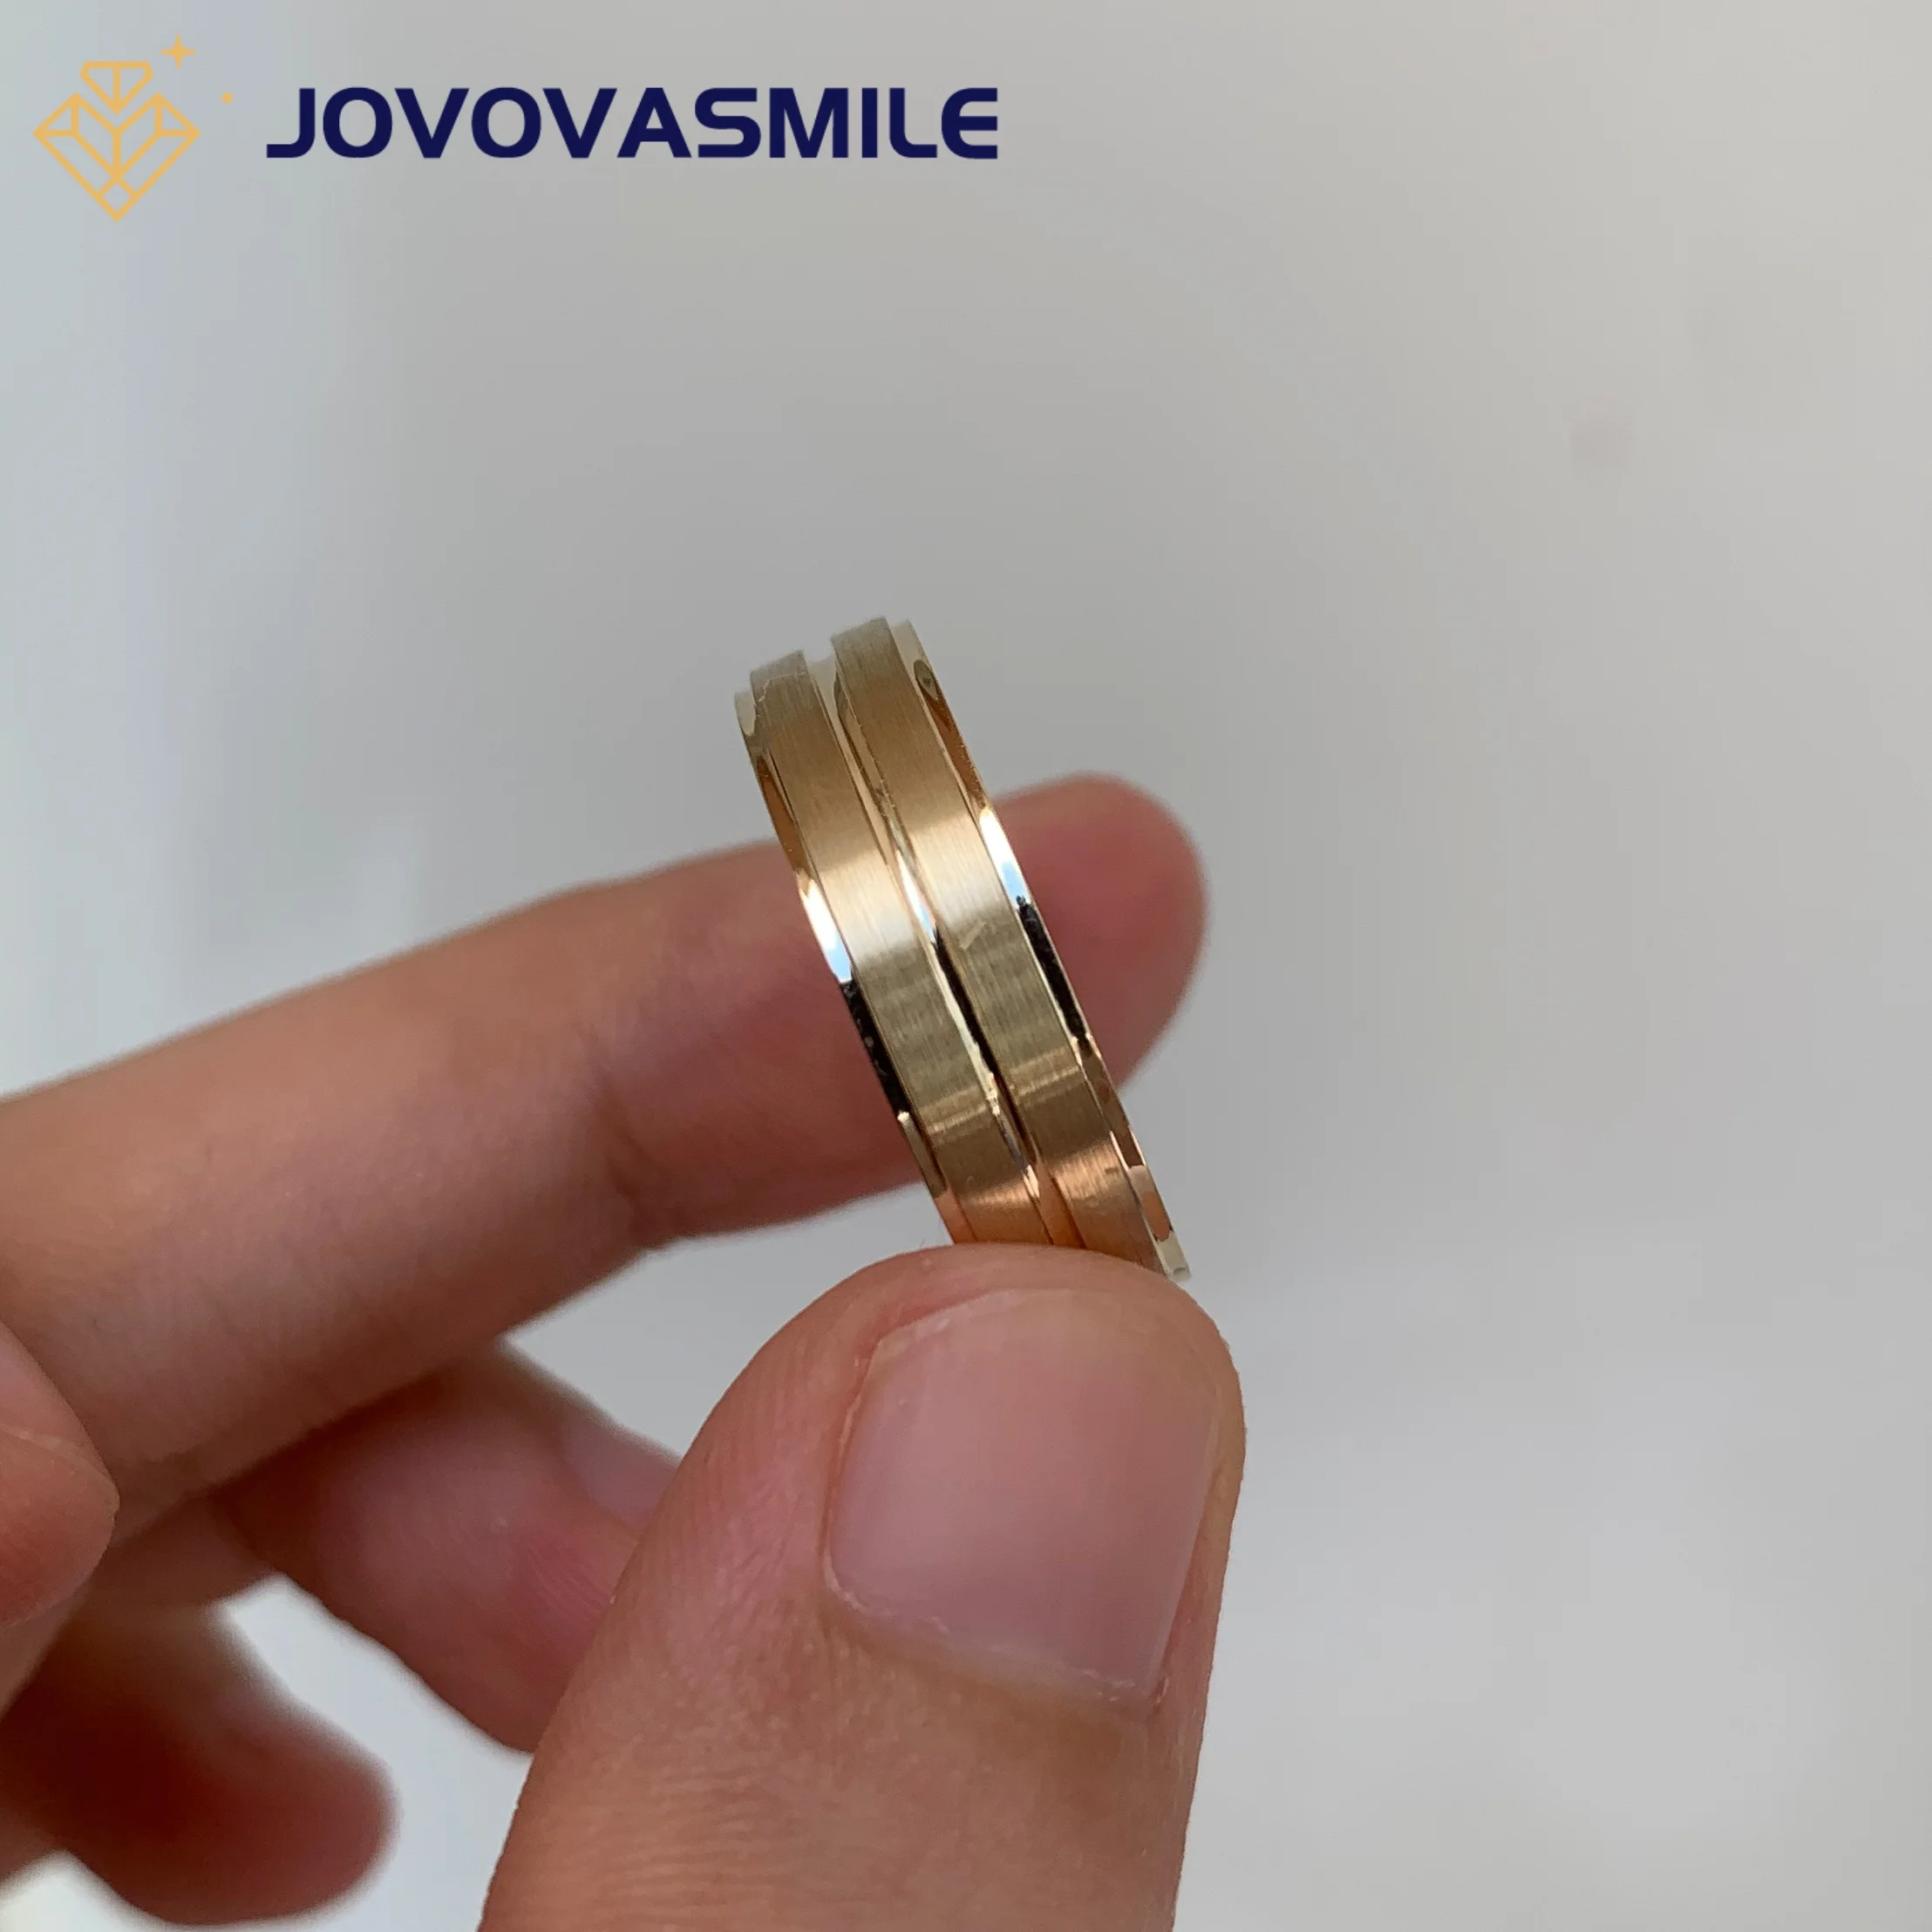 JOVOVASMILE 9K 14K 18K Yellow Gold Man Wedding Engagement Rings Bridegroom Jewelry with Certificate blush boutonniere men s wedding with pins bridegroom and best men s boutonniere wedding anniversary formal dinner retro wedding